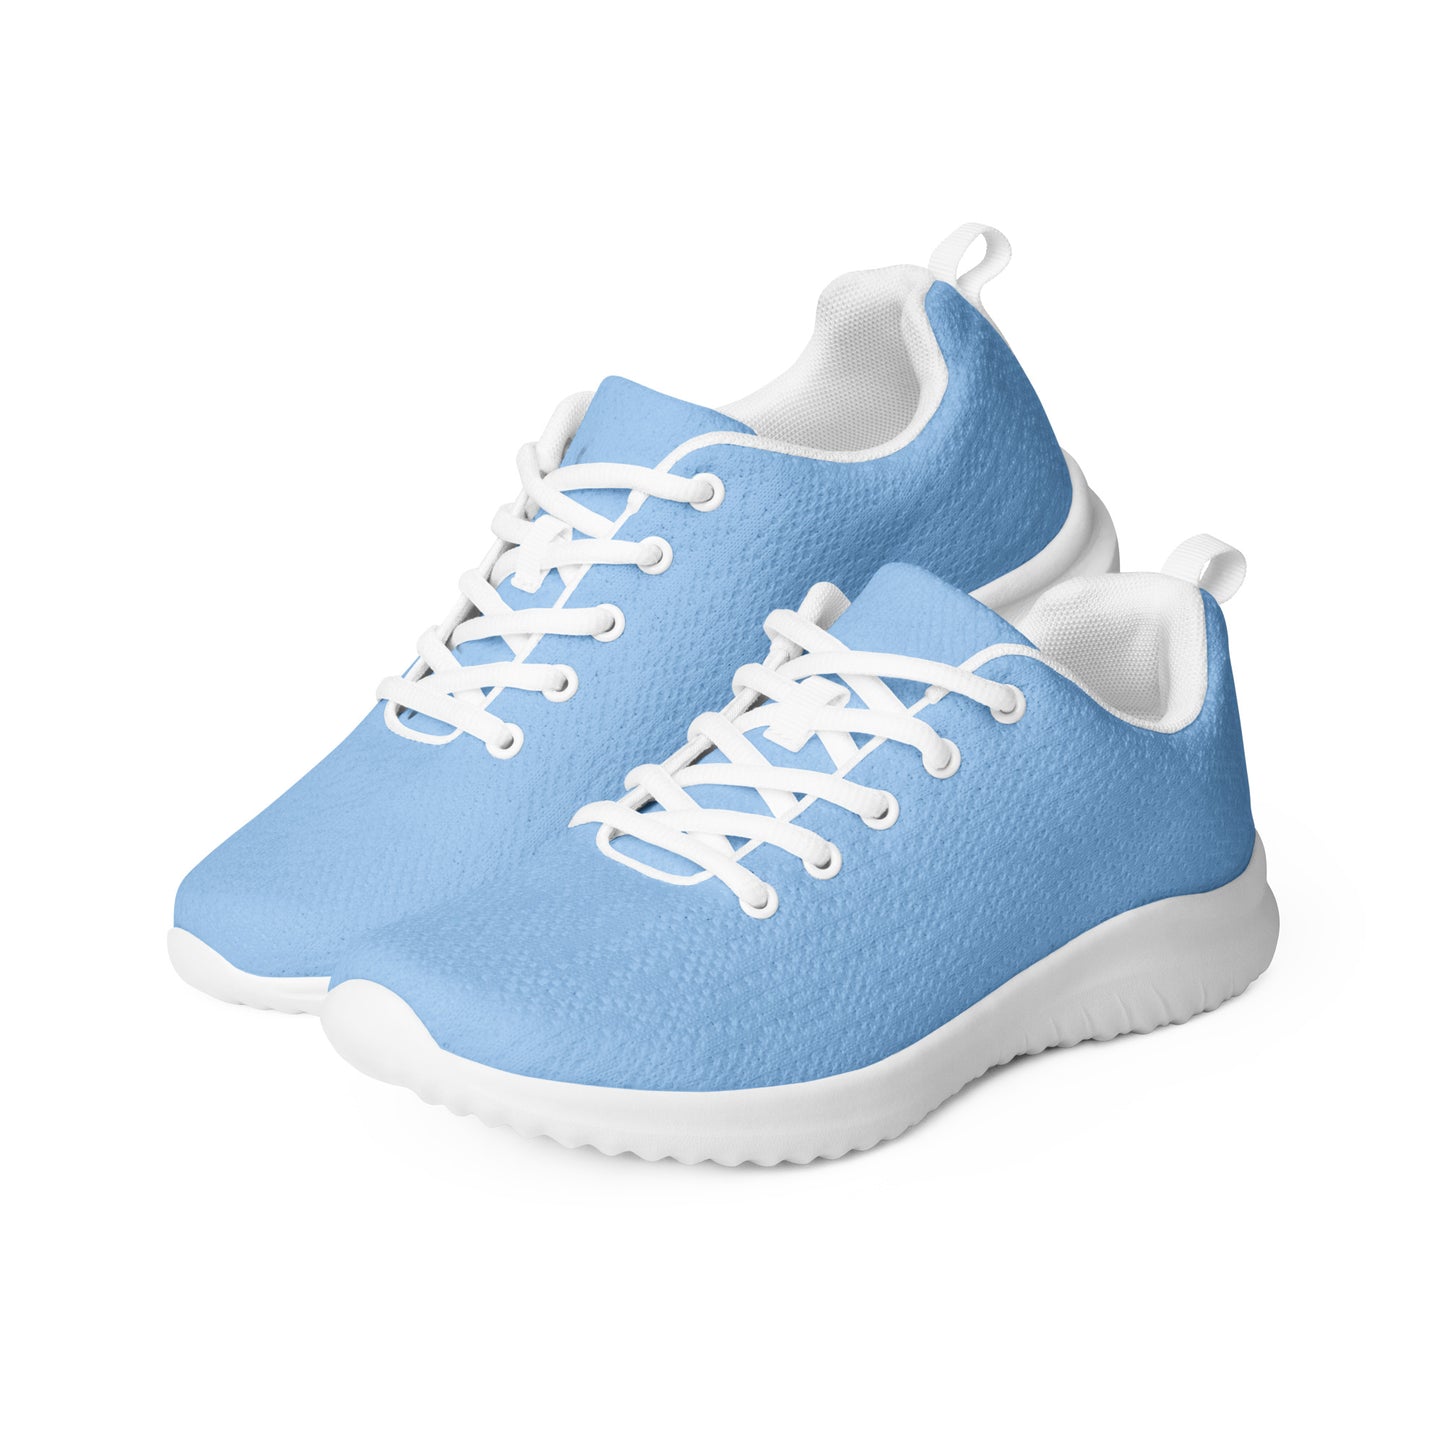 Snooty Fox Art Women’s Athletic Shoes - Baby Blues